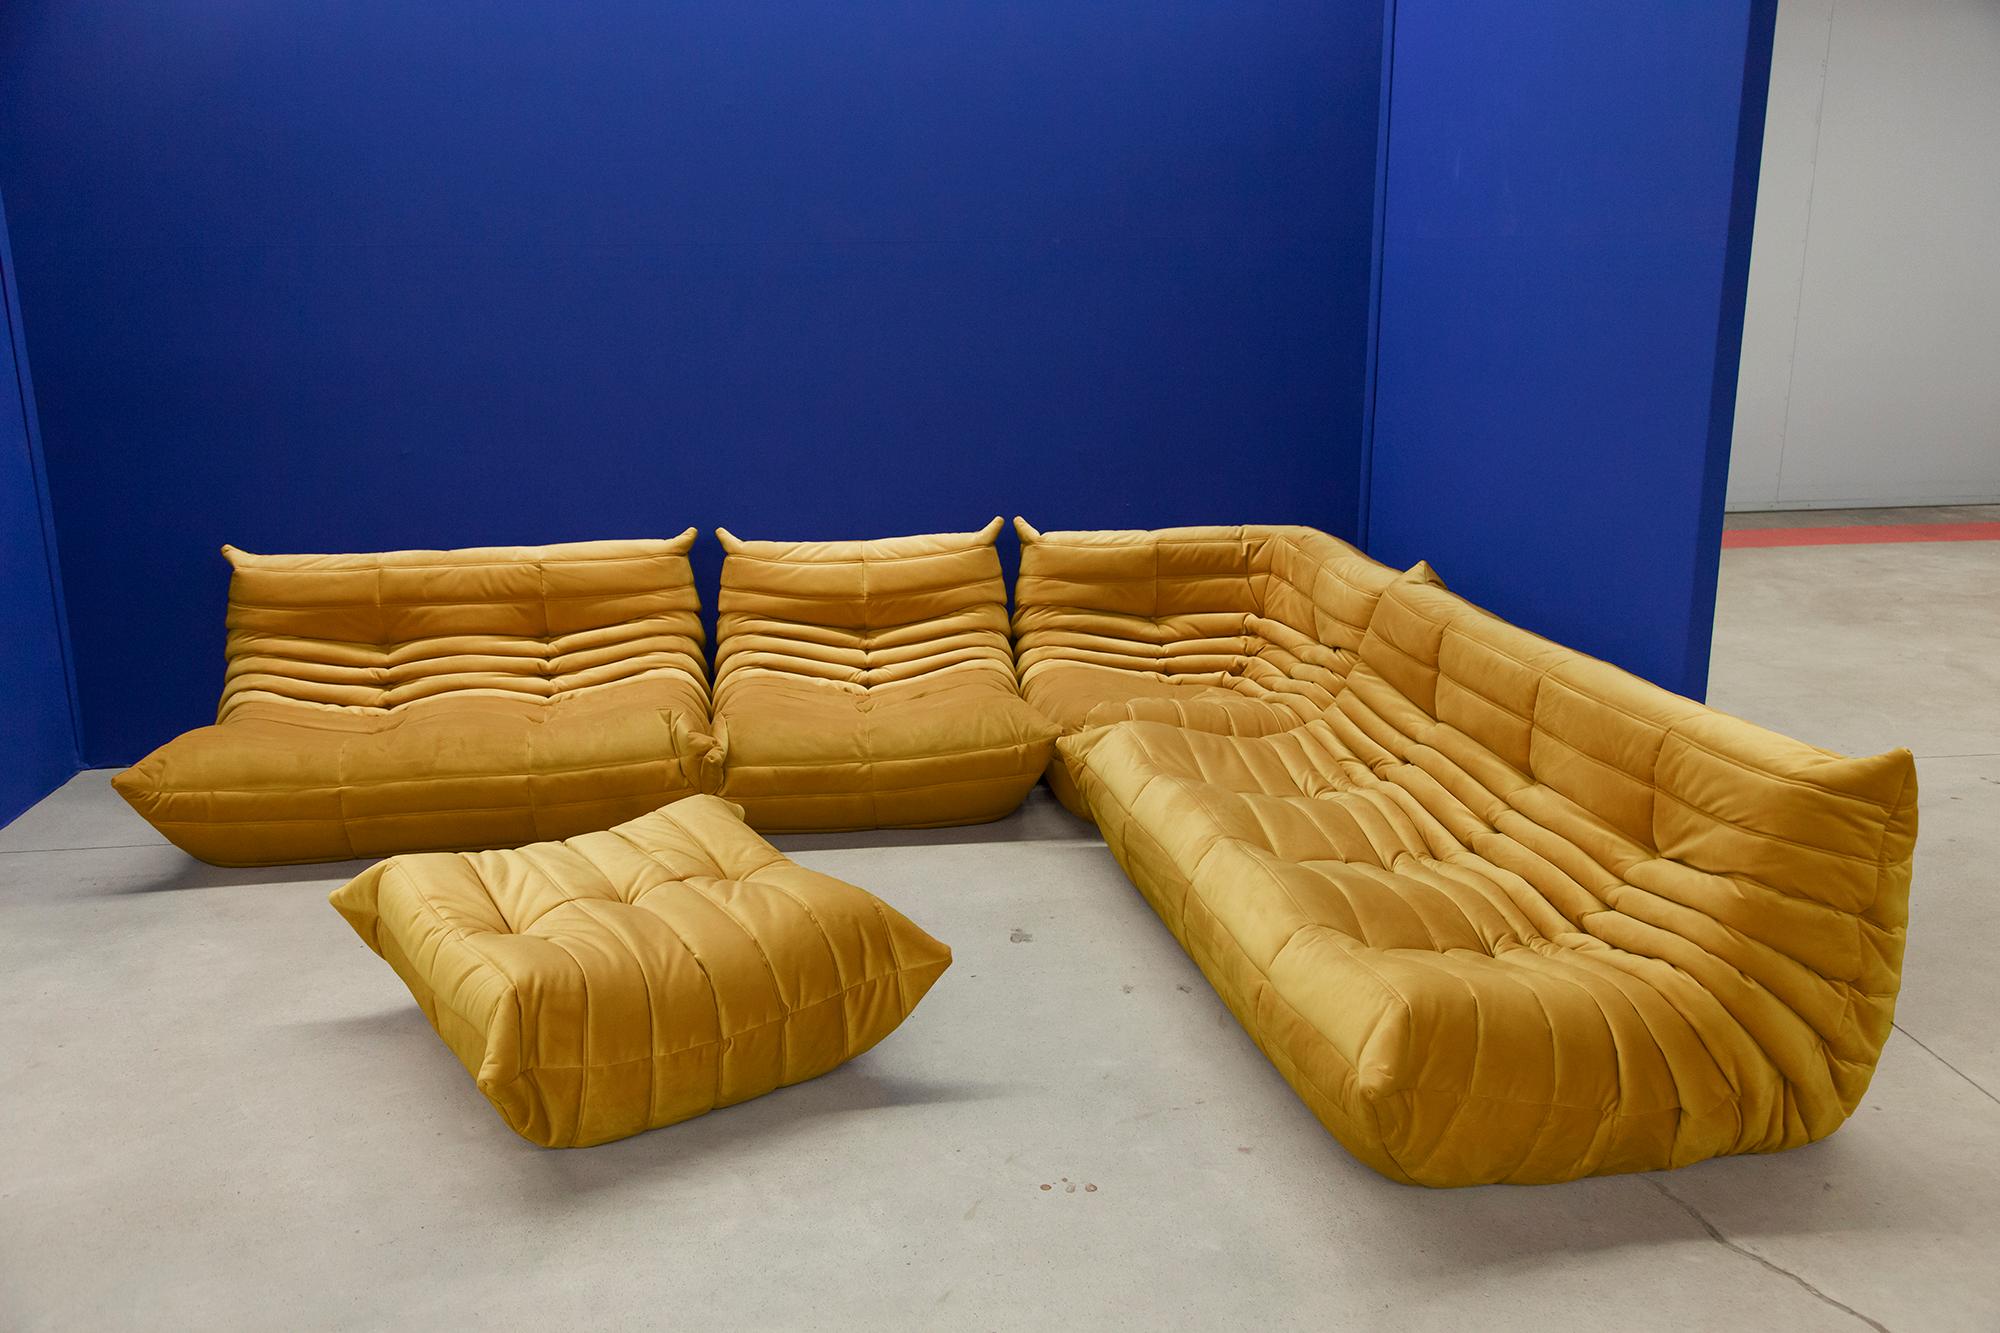 This Togo living room set was designed by Michel Ducaroy in 1974 and was manufactured by Ligne Roset in France. Each piece has the original Ligne Roset logo and genuine bottom. It has been reupholstered in genuine high quality golden/yellow velvet